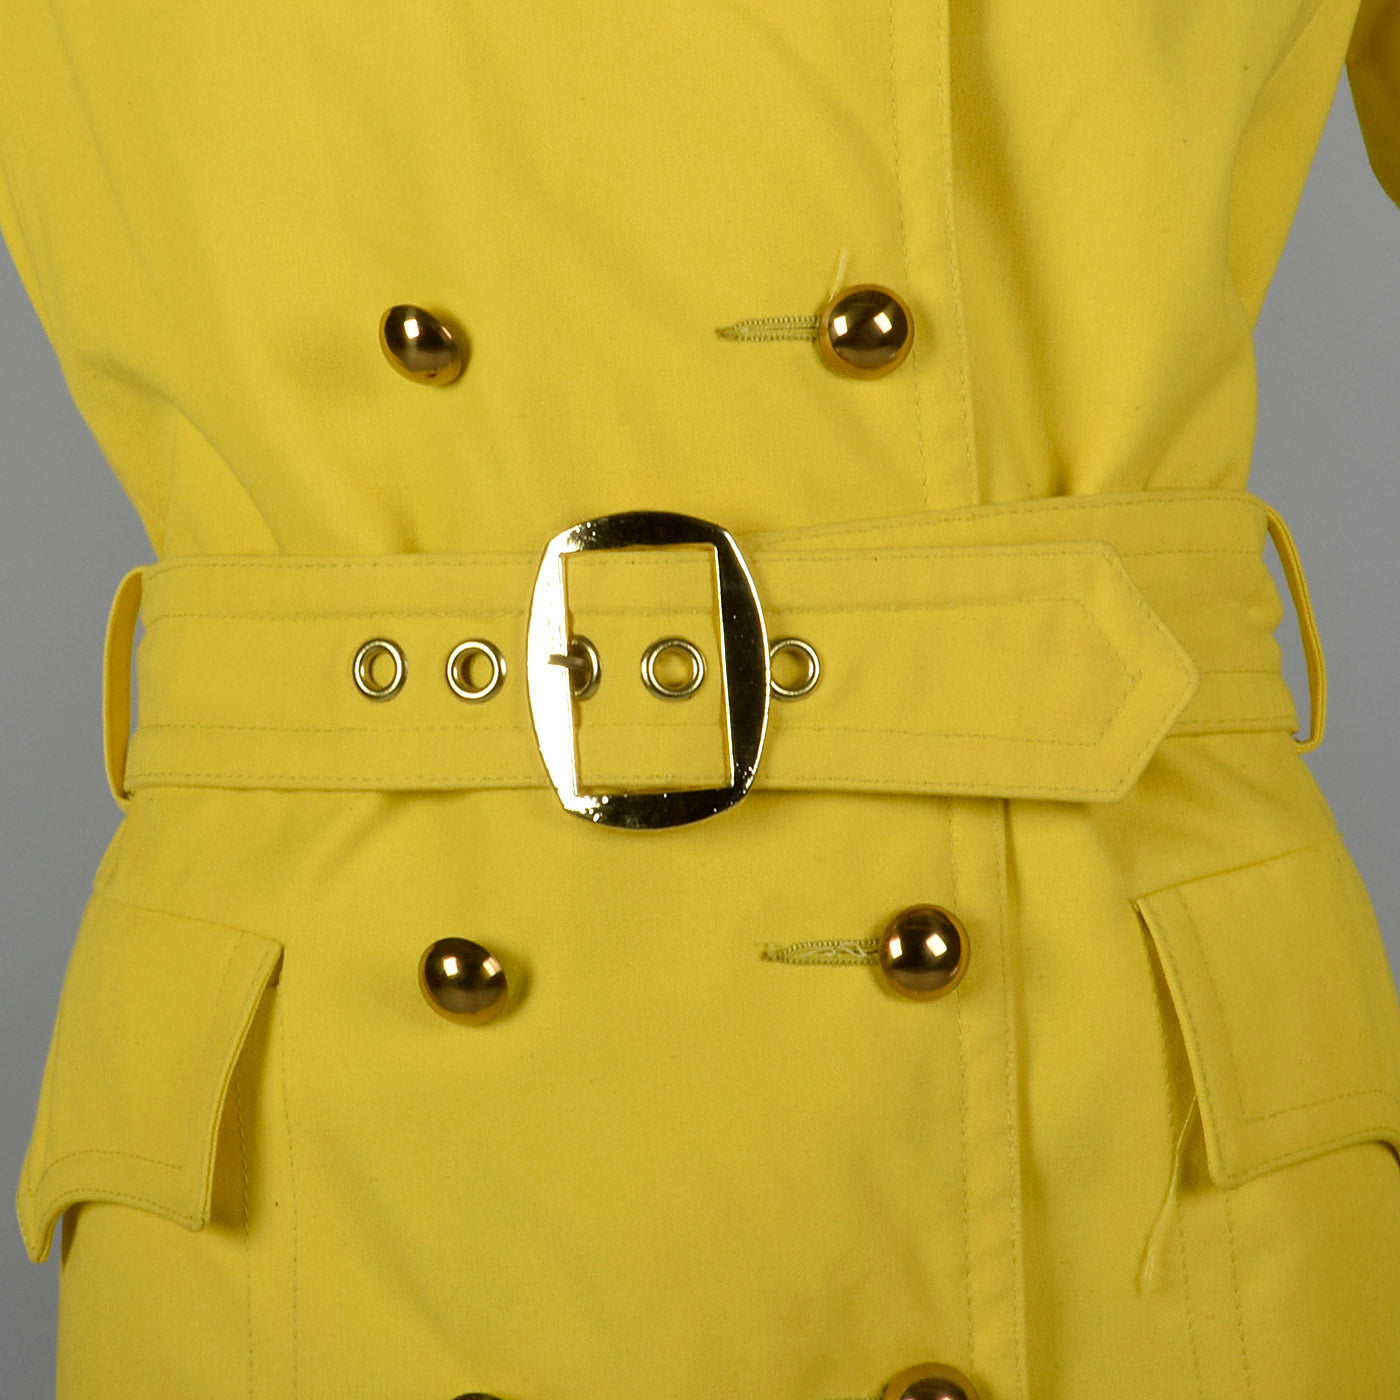 1960s Anne Klein Mod Yellow Trench Coat